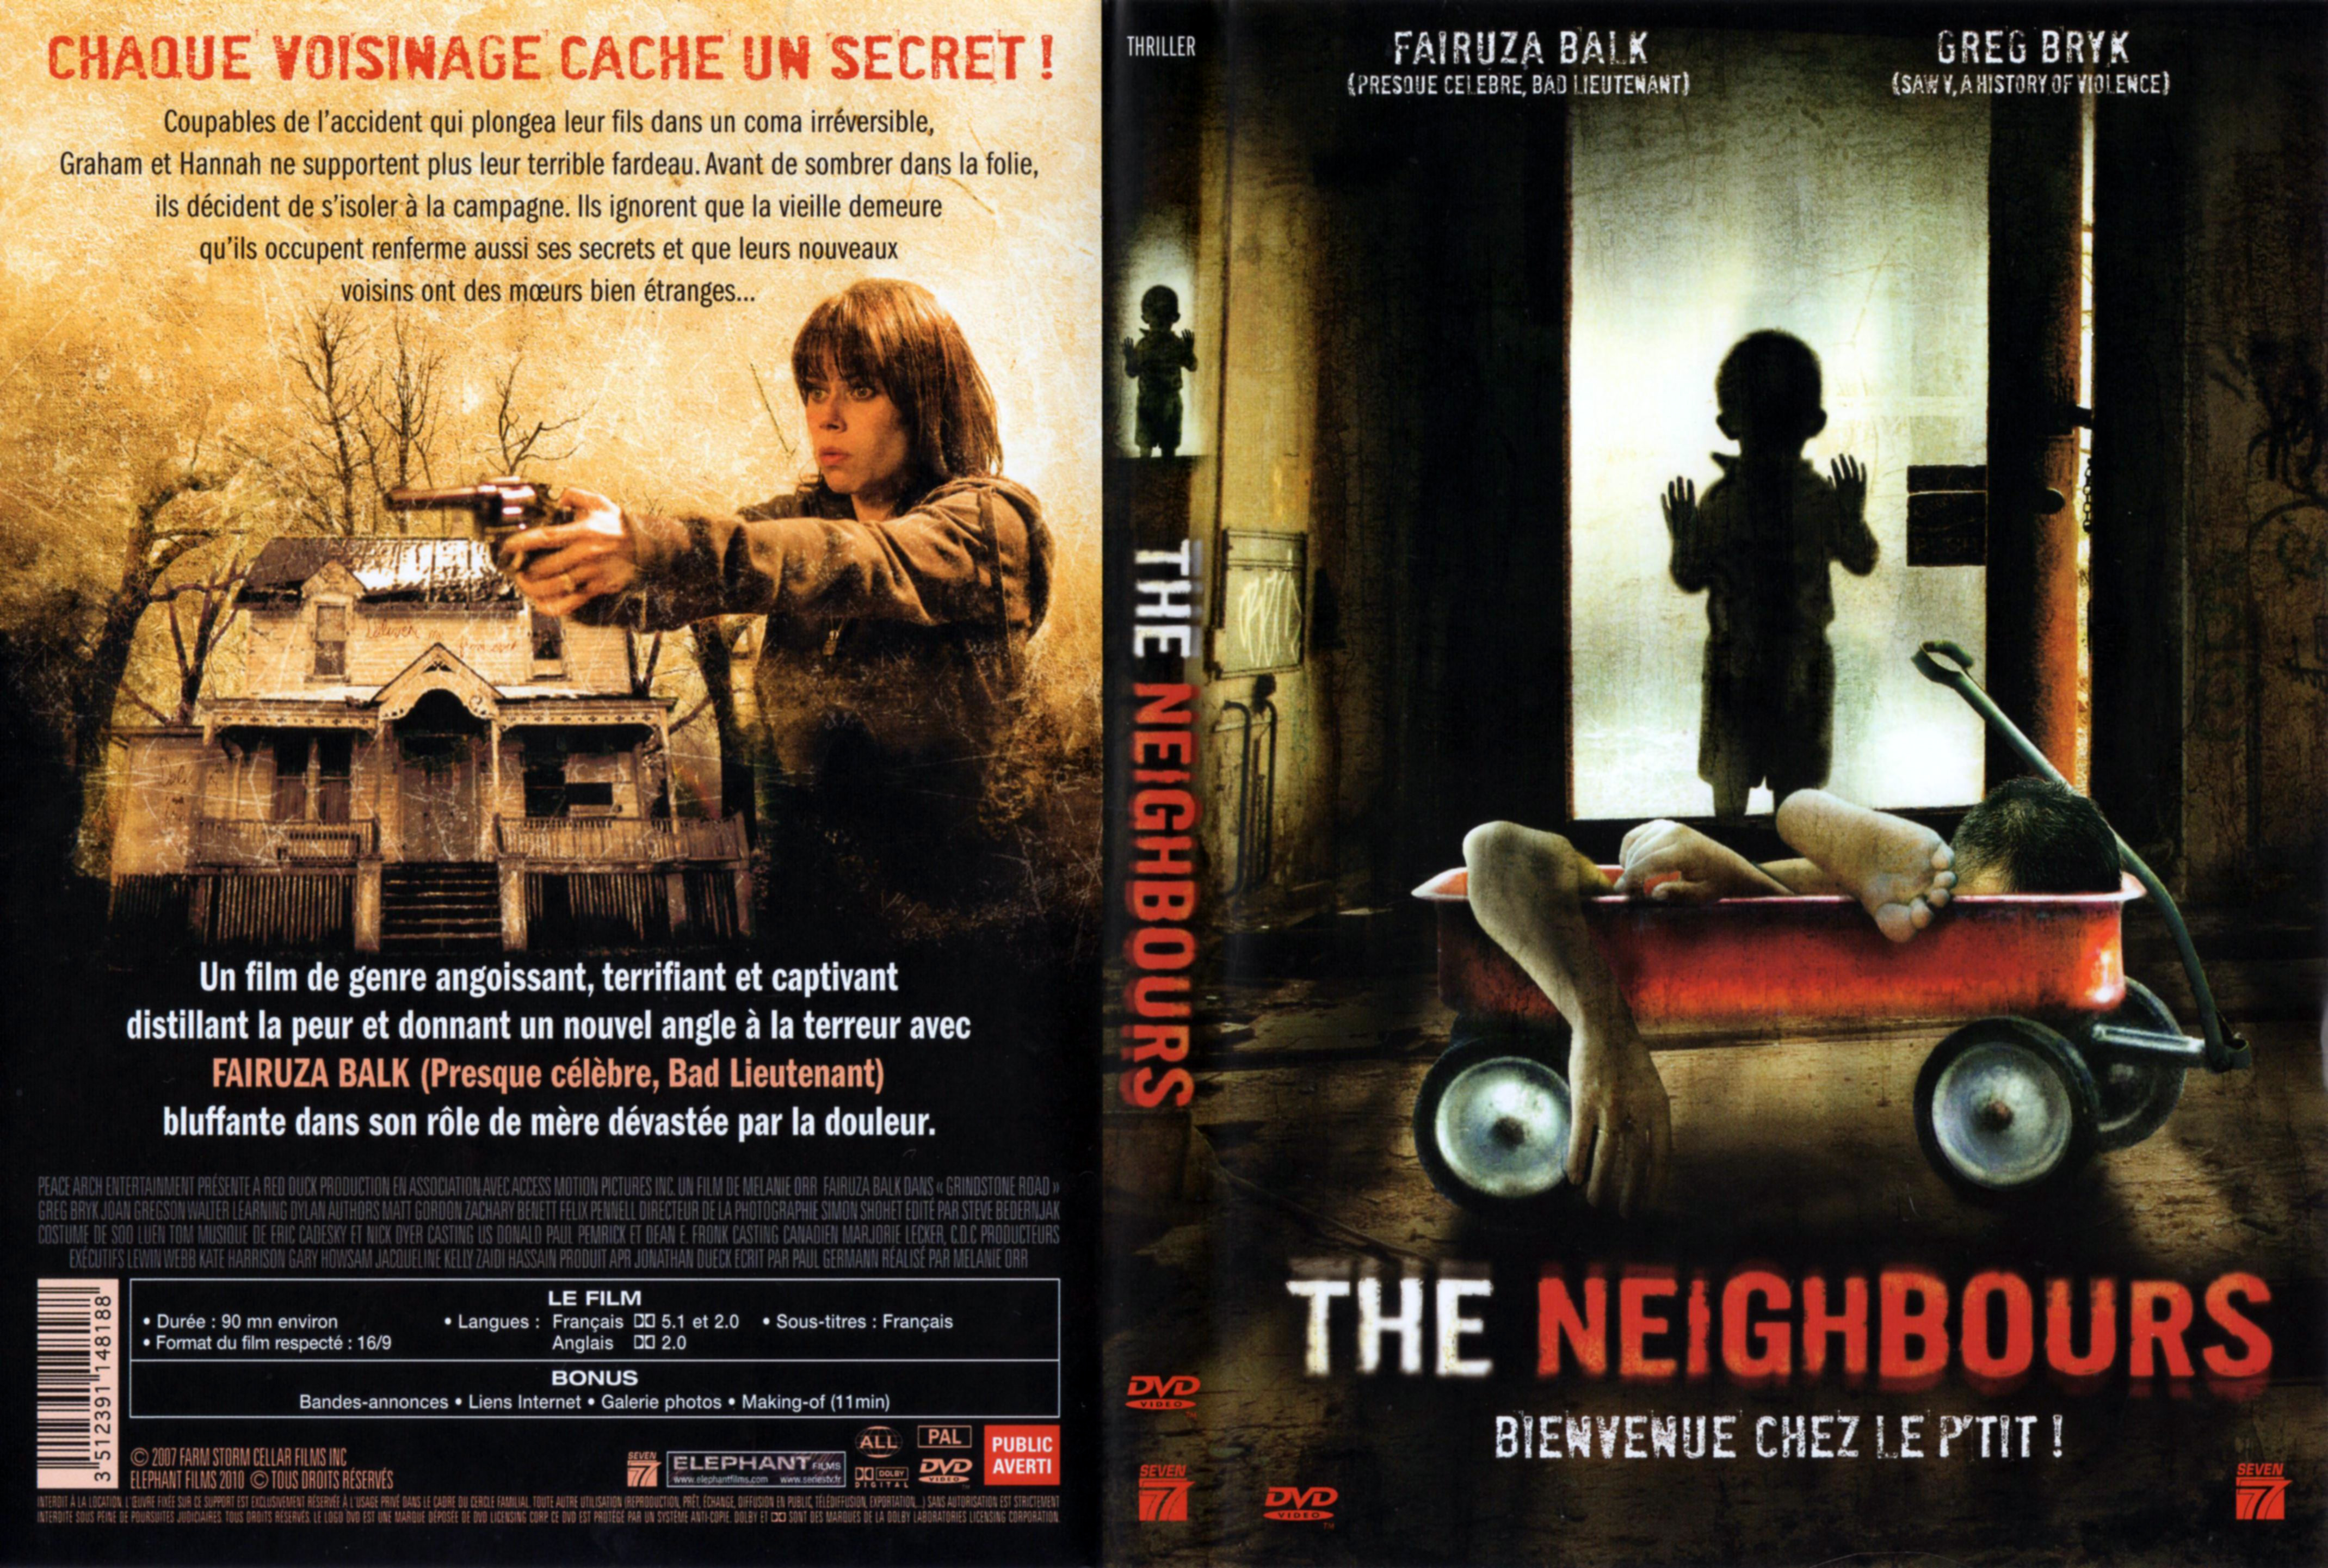 Jaquette DVD The neighbours